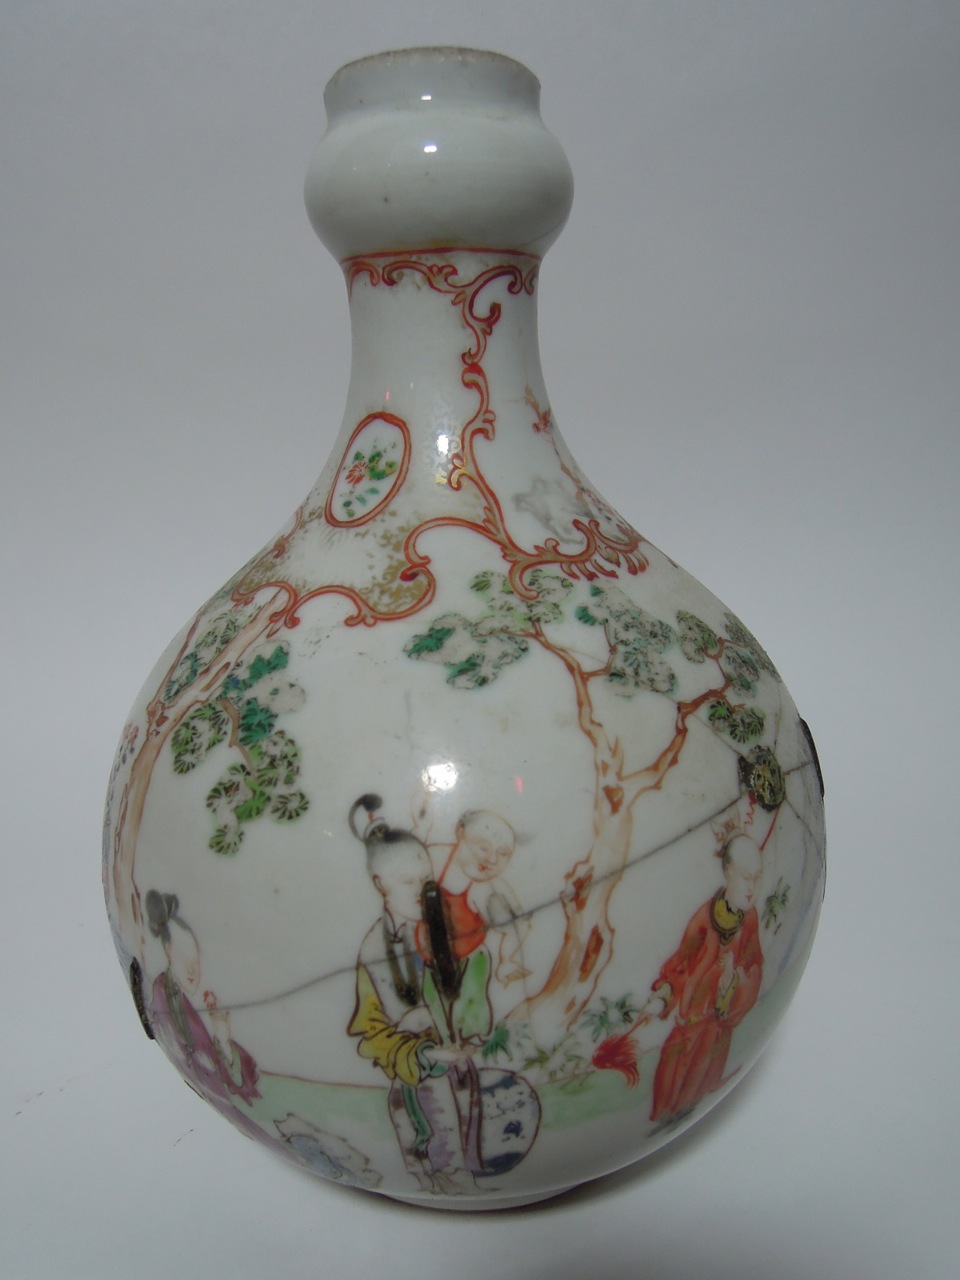 A 19th century Chinese export Famille Rose garlic neck bottle vase decorated with woman and children